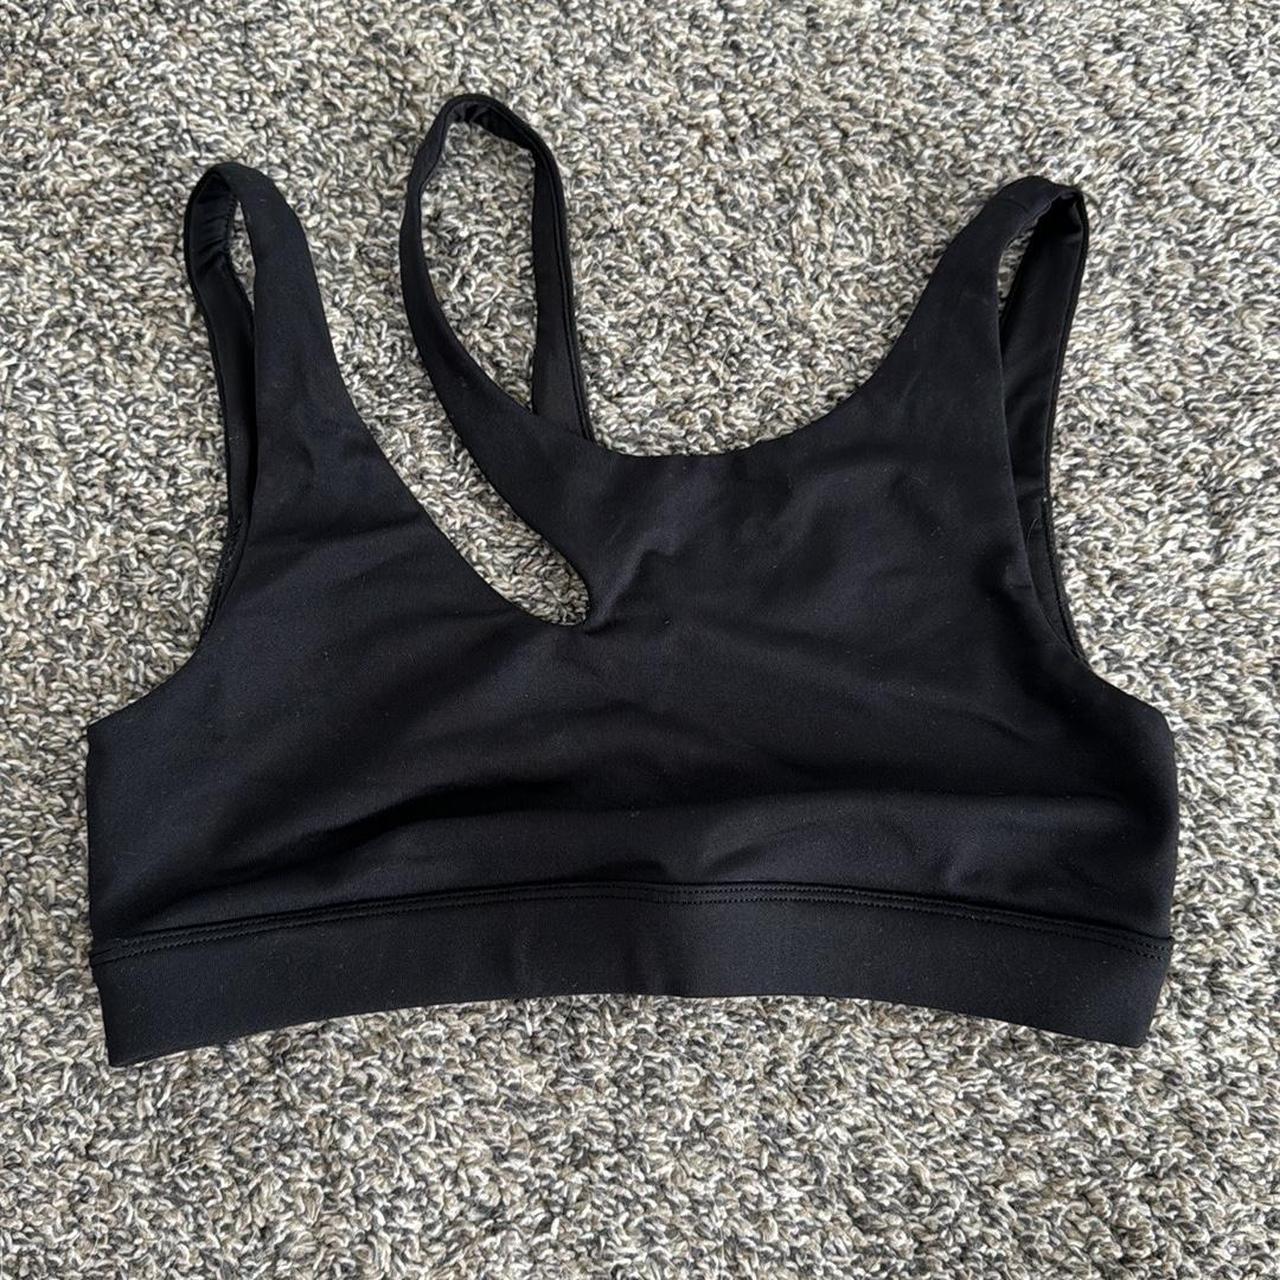 Alo Yoga bra - size XS Repop, never worn by me just - Depop